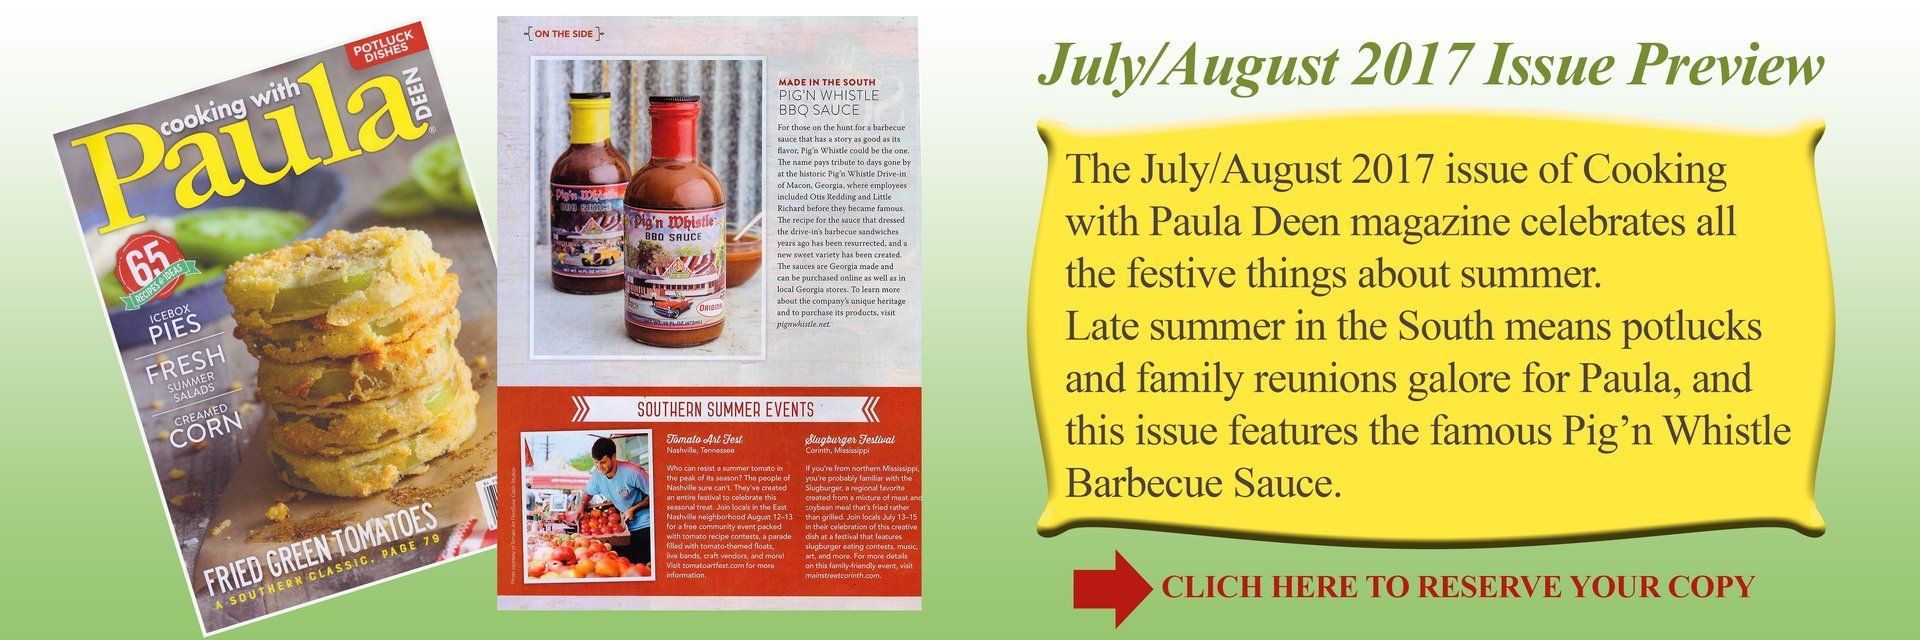 The July/August 2017 issue of Cooking with Paula Deen magazine celebrates all the festive things about summer. Late summer in the South means potlucks and family reunions galore for Paula, and this issue features the famous Pig’n Whistle Barbecue Sauce.